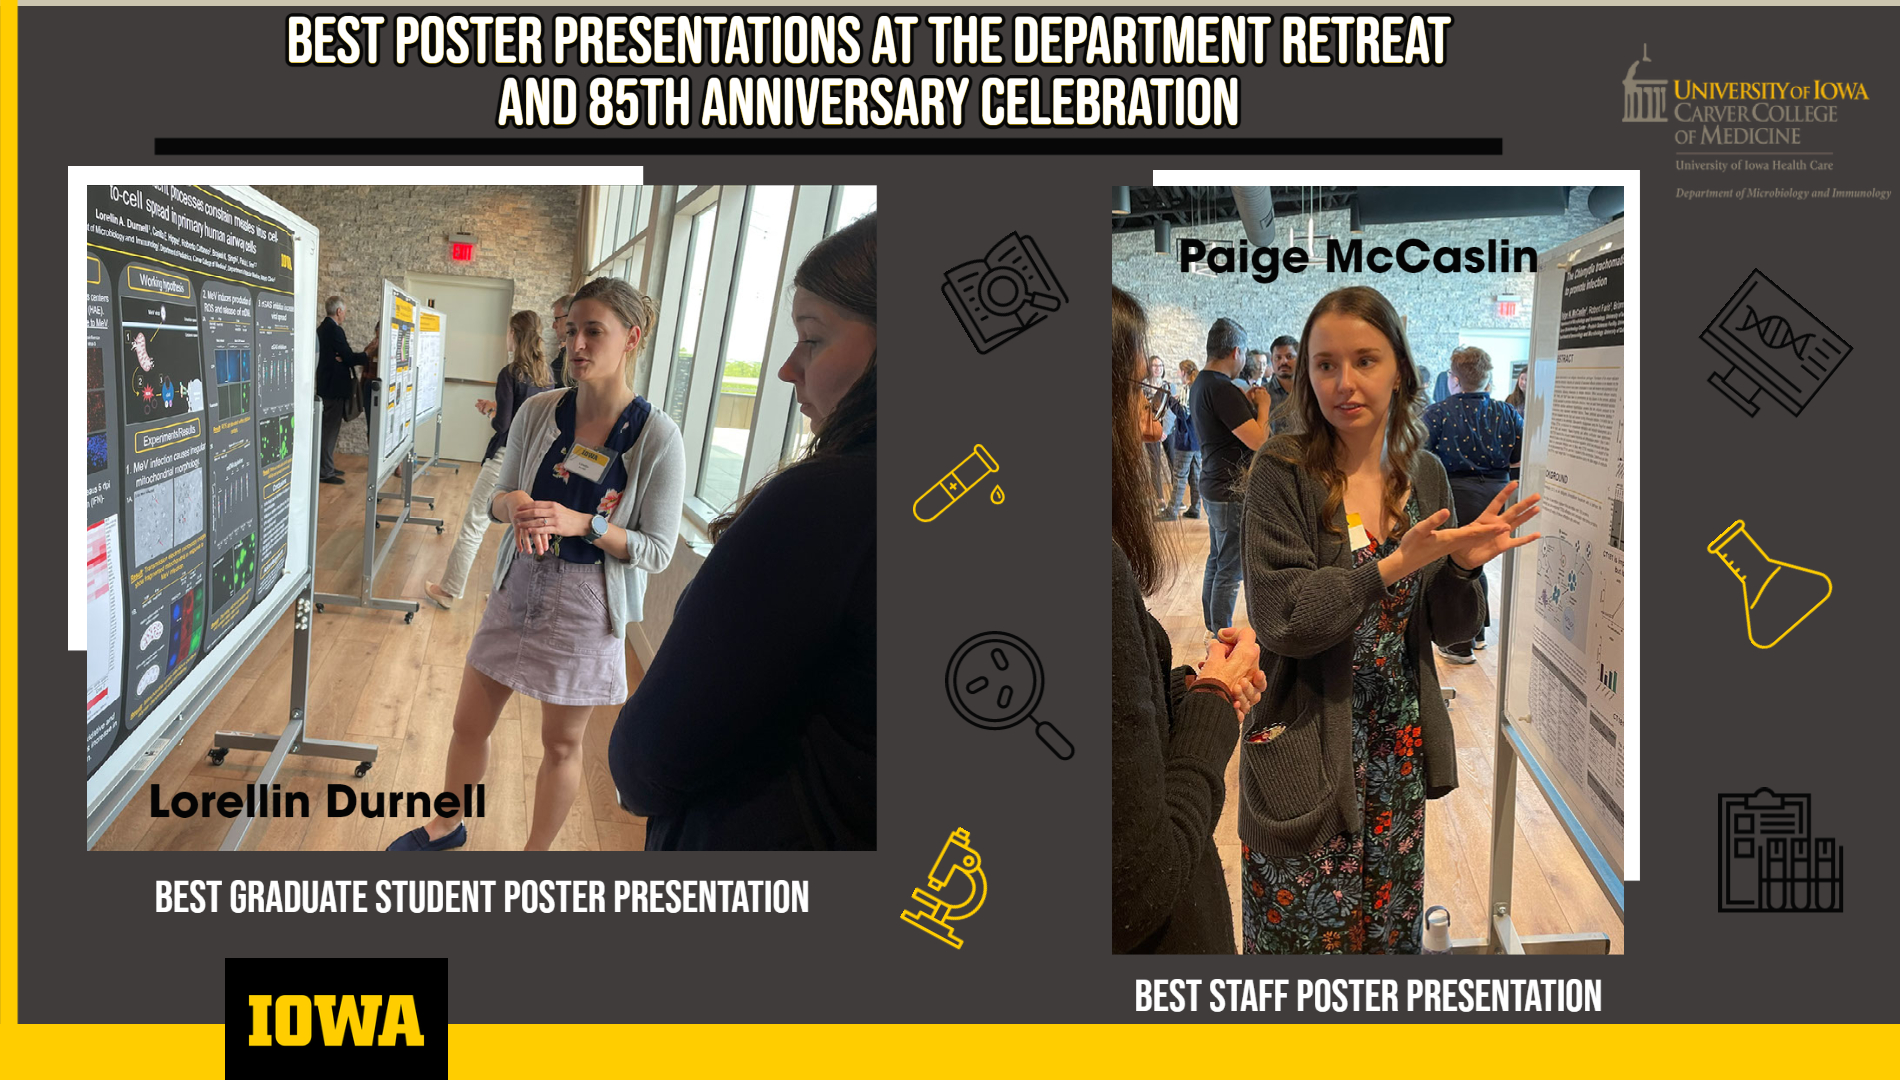 Best Poster Presentations - image of Paige McCaslin and Lorellin Durnell